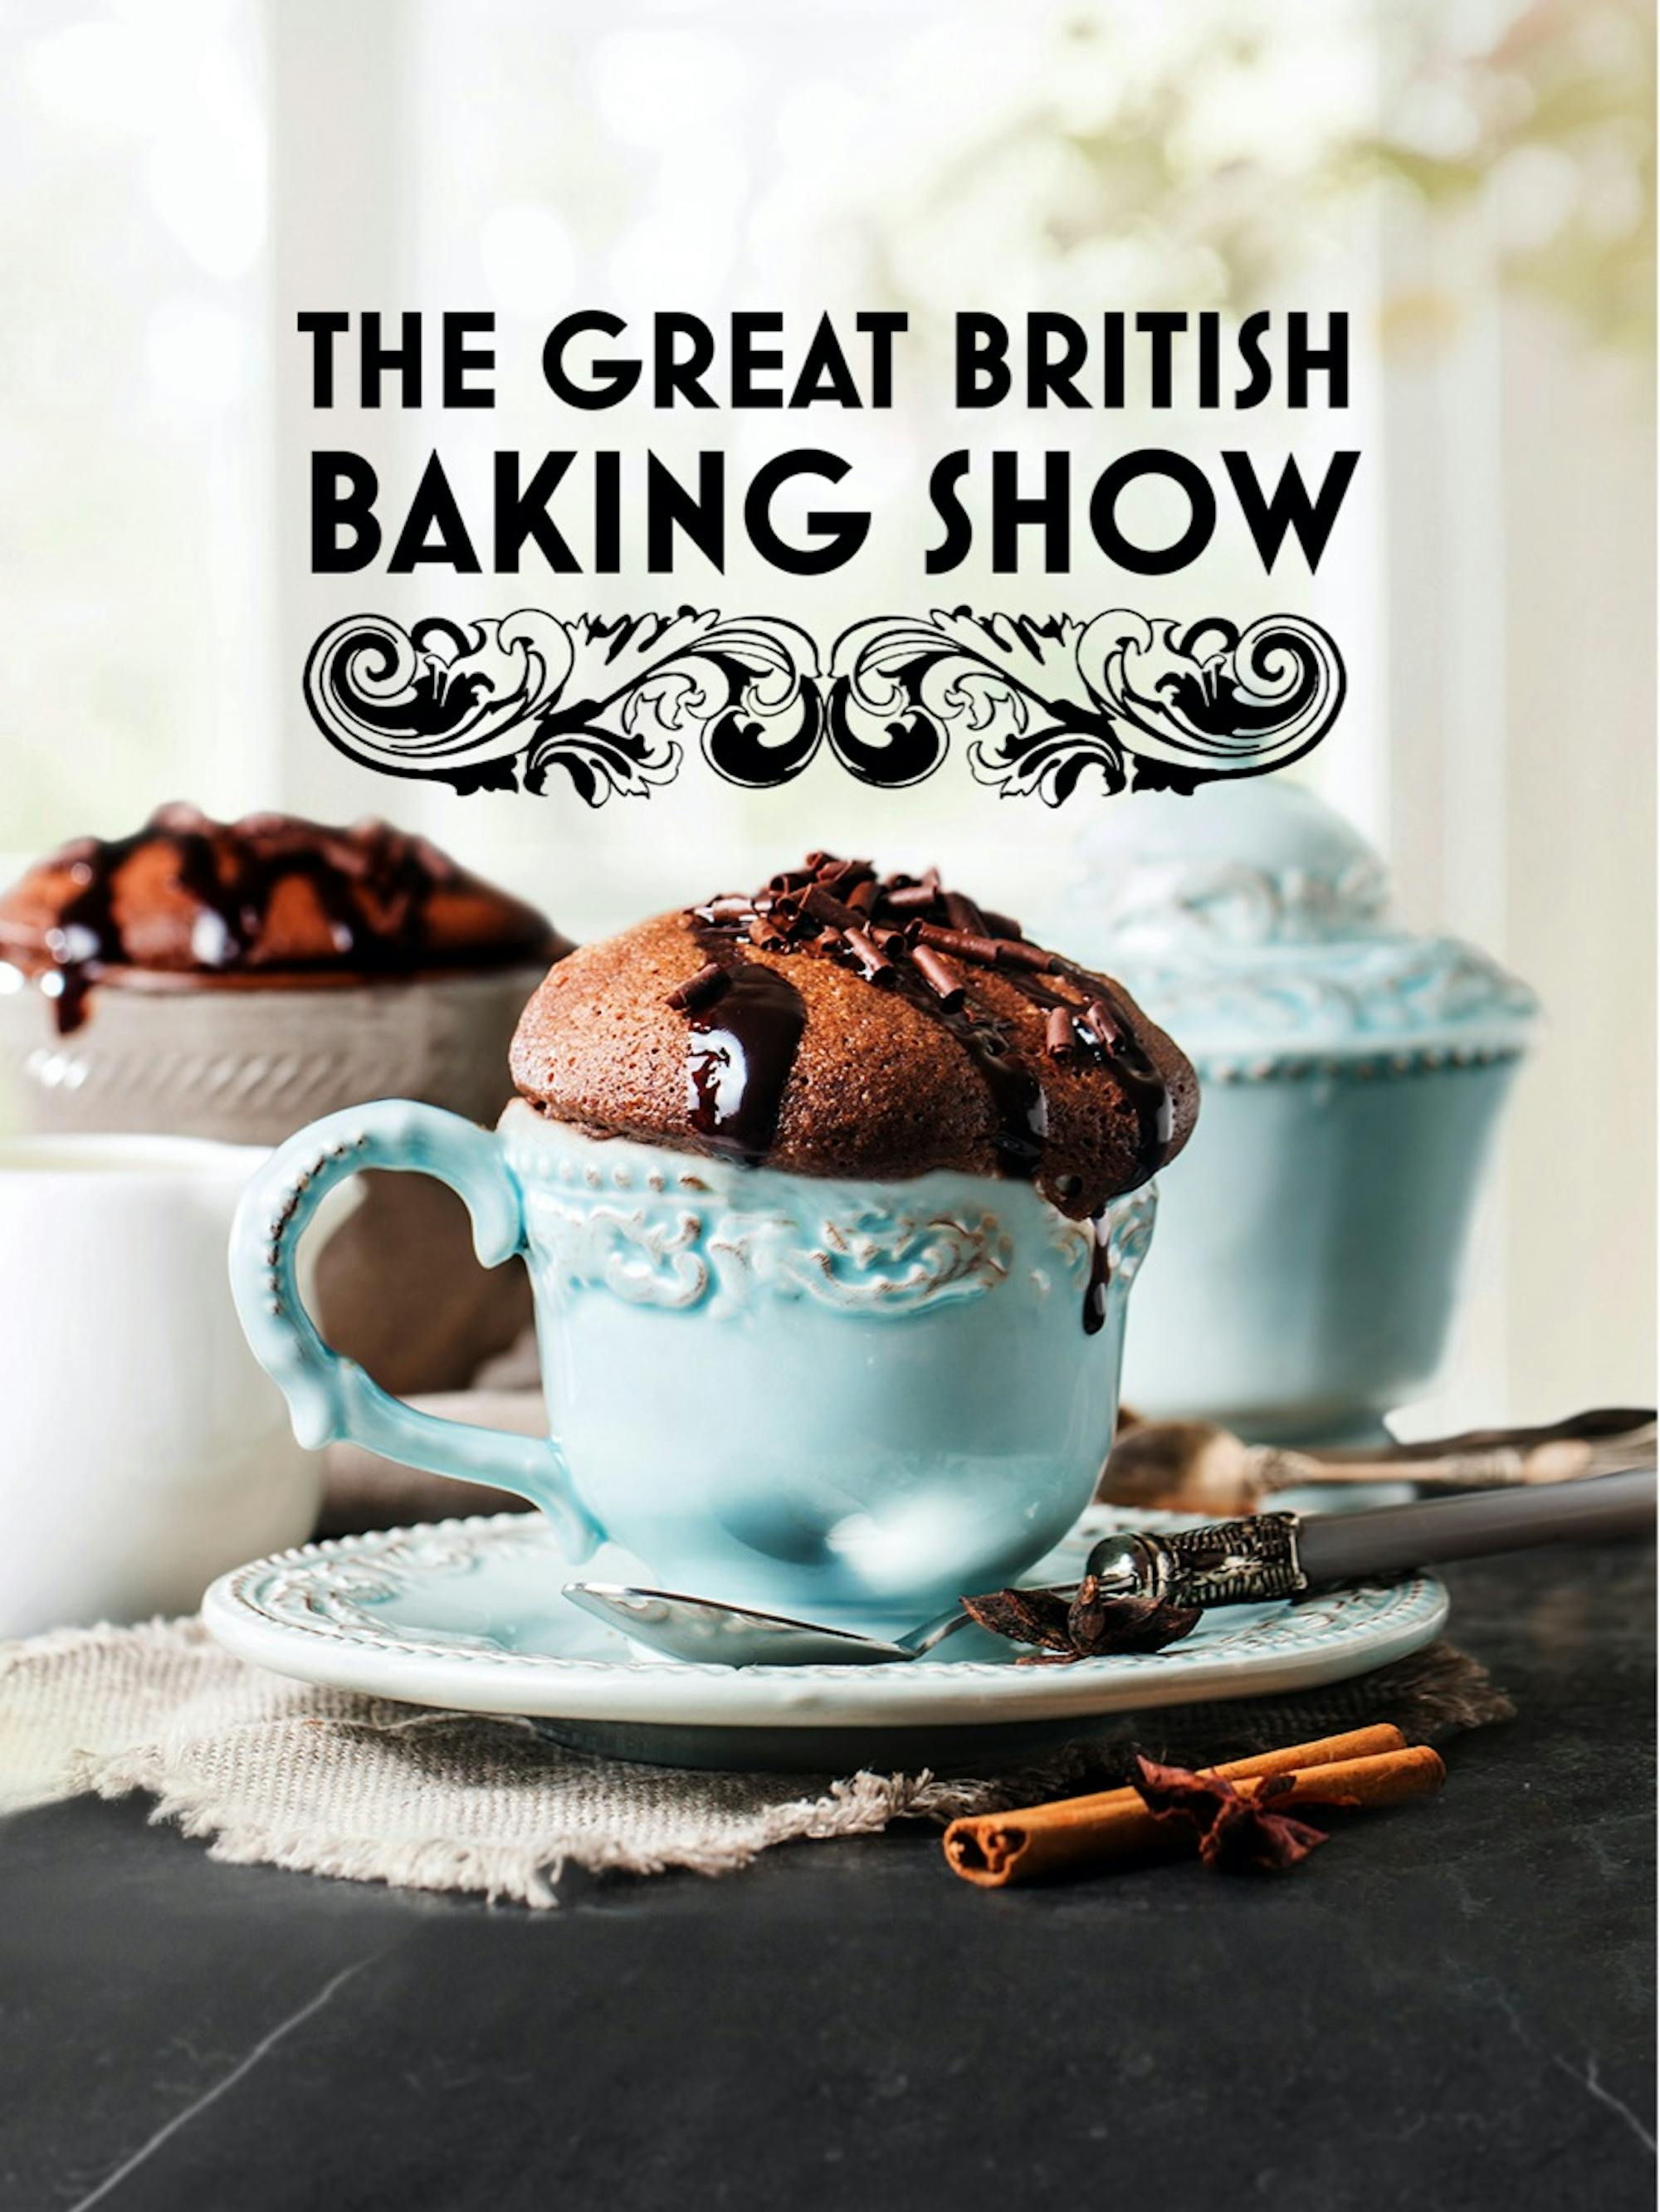 A poster for The Great British Baking Show. In blue and white tea cups are delicious chocolate creations. Two sticks of cinnamon sit in the foreground.